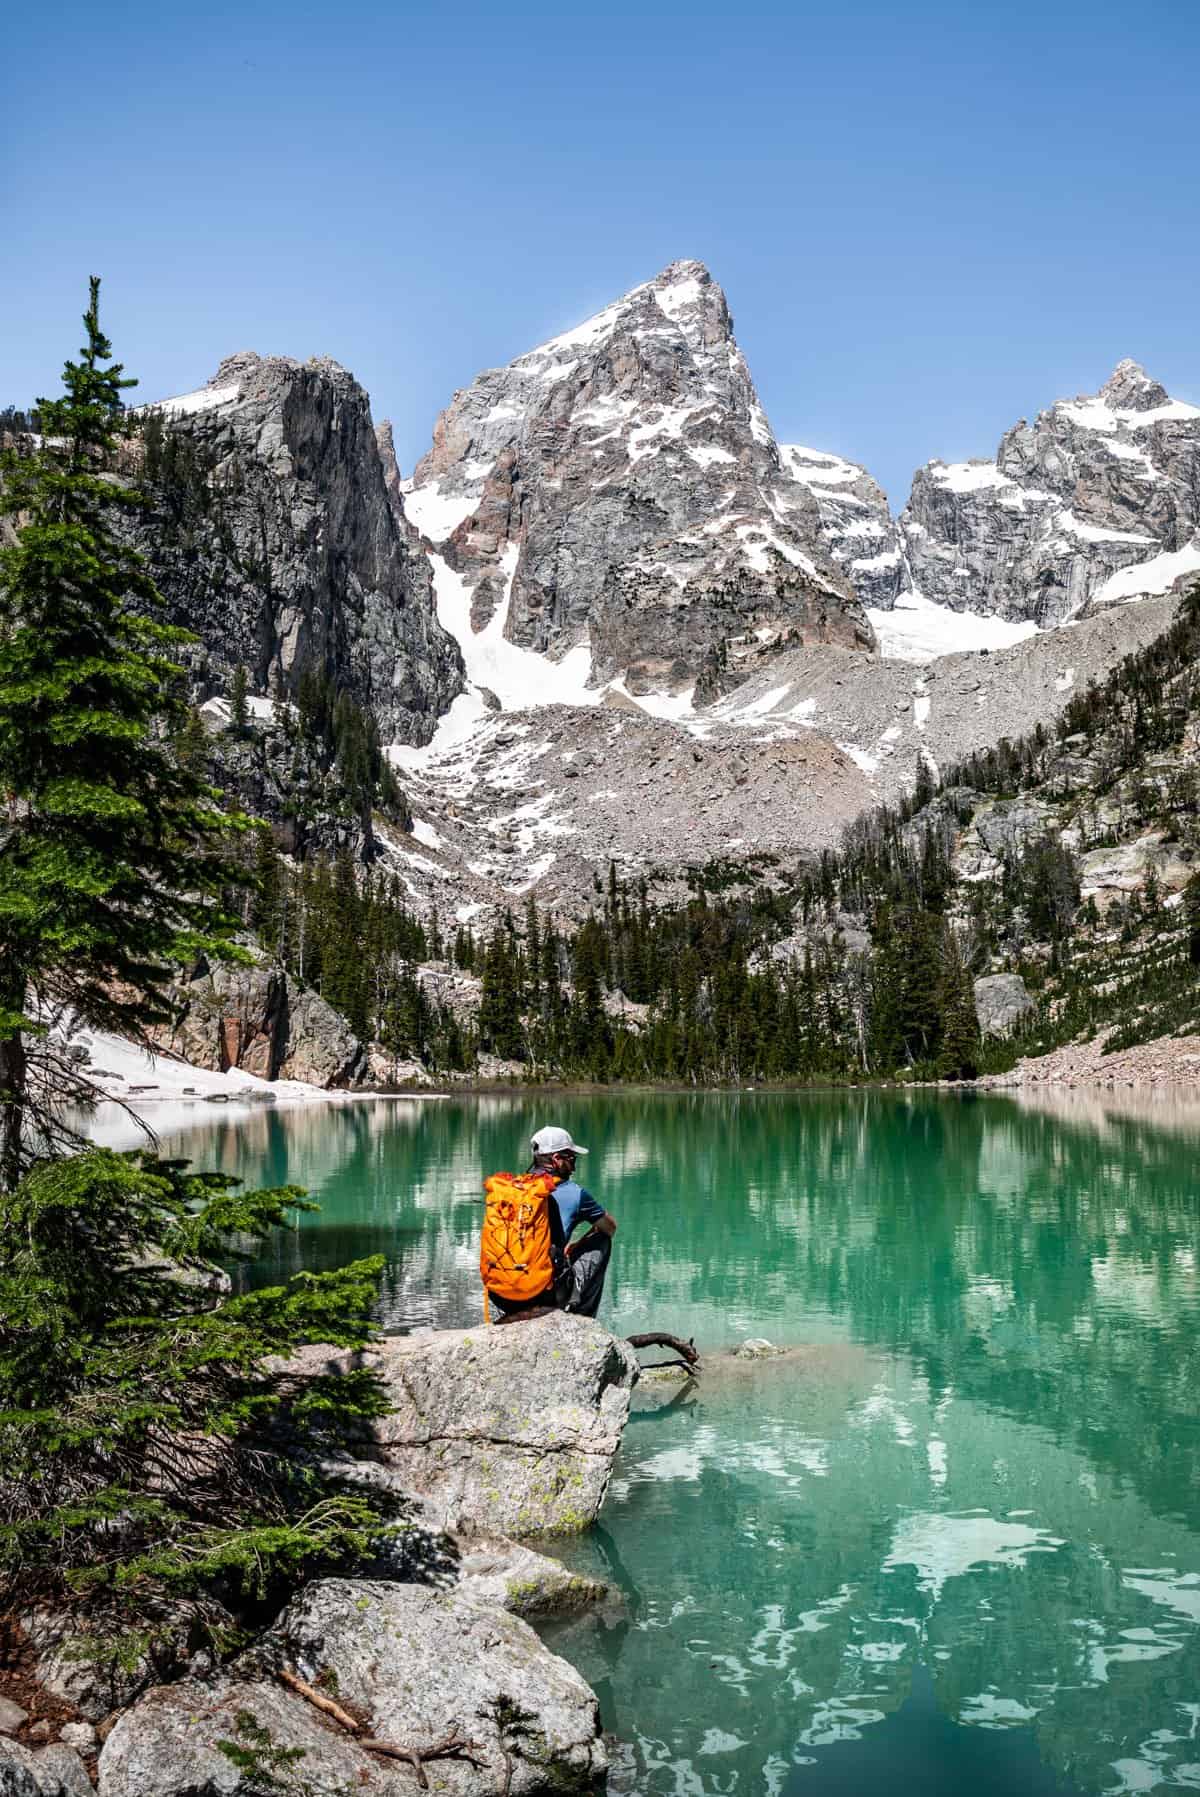 A man with an orange backpack sitting on a large rock looking out over a turquoise lake with a tall mountain peak in the background.